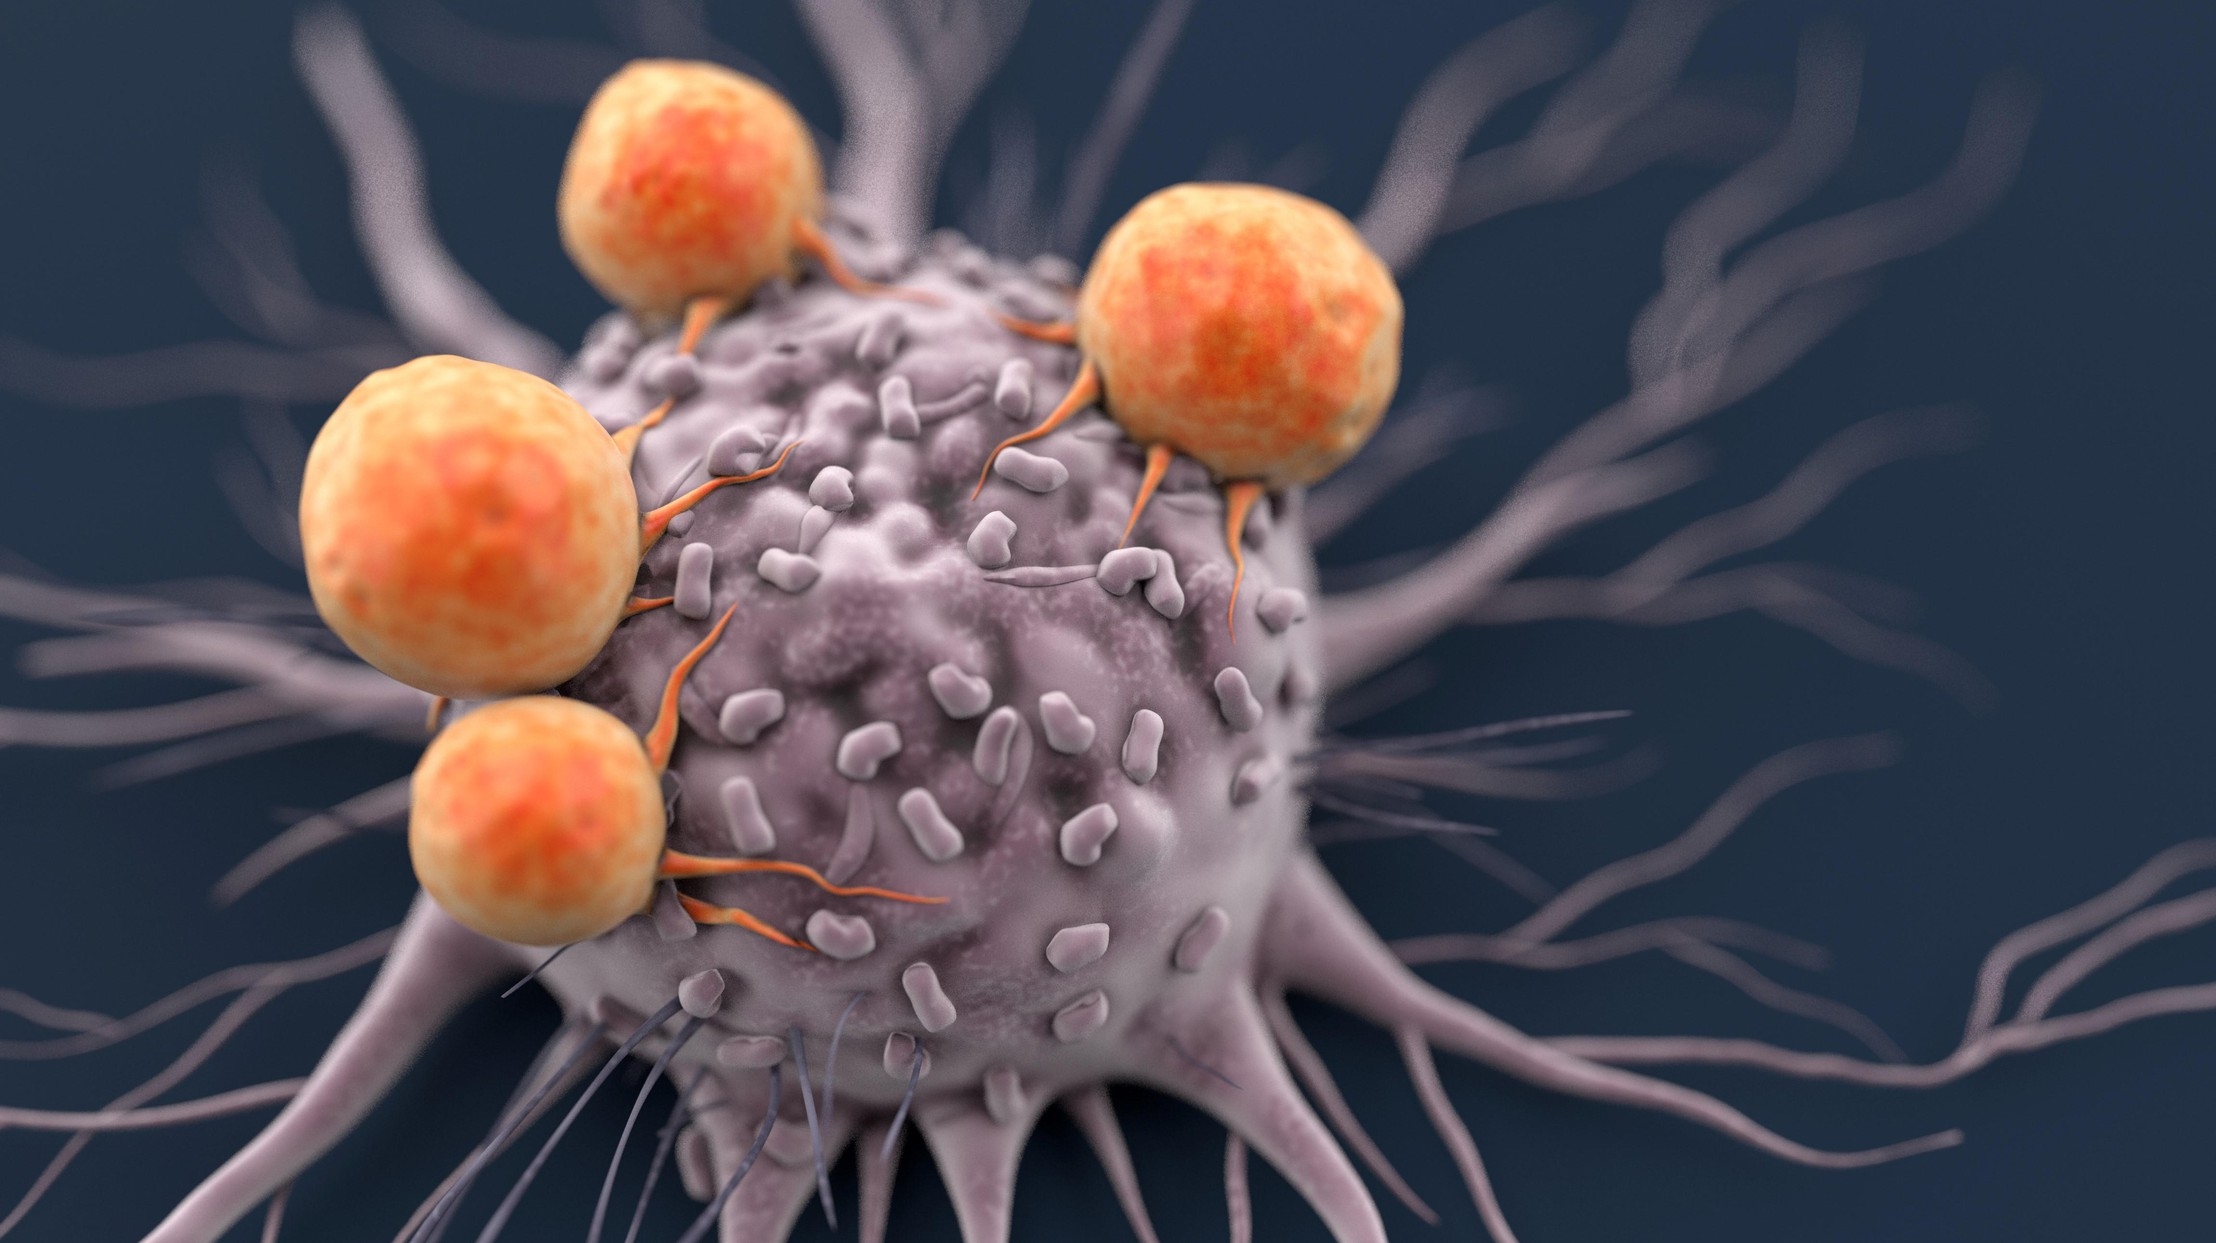 Supercharging CAR-T Cells for Cancer Treatment